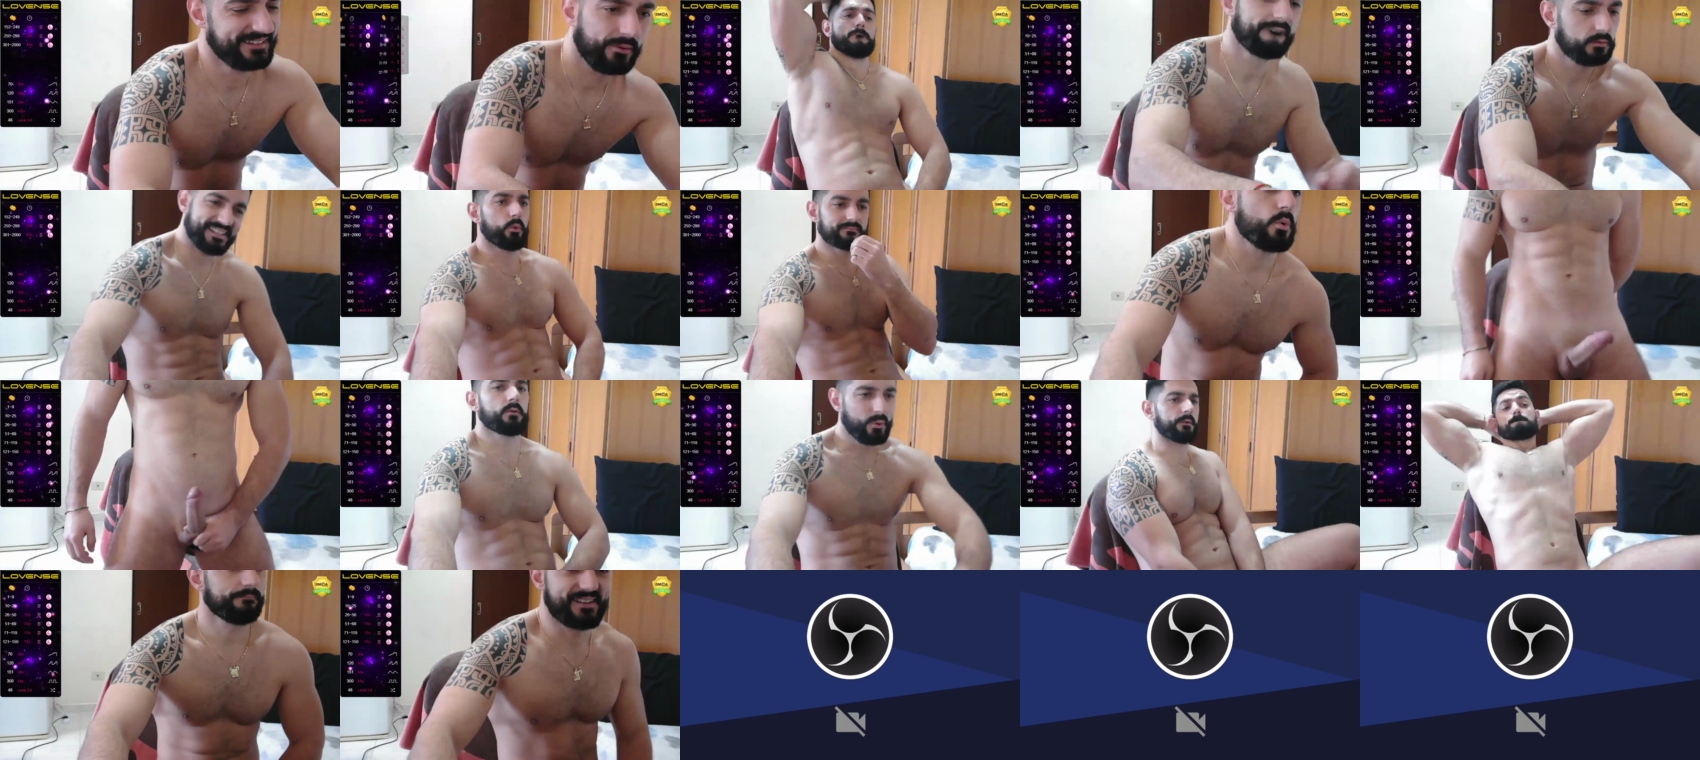 ricky_muscle_1993 bigcock CAM SHOW @ Chaturbate 12-12-2022